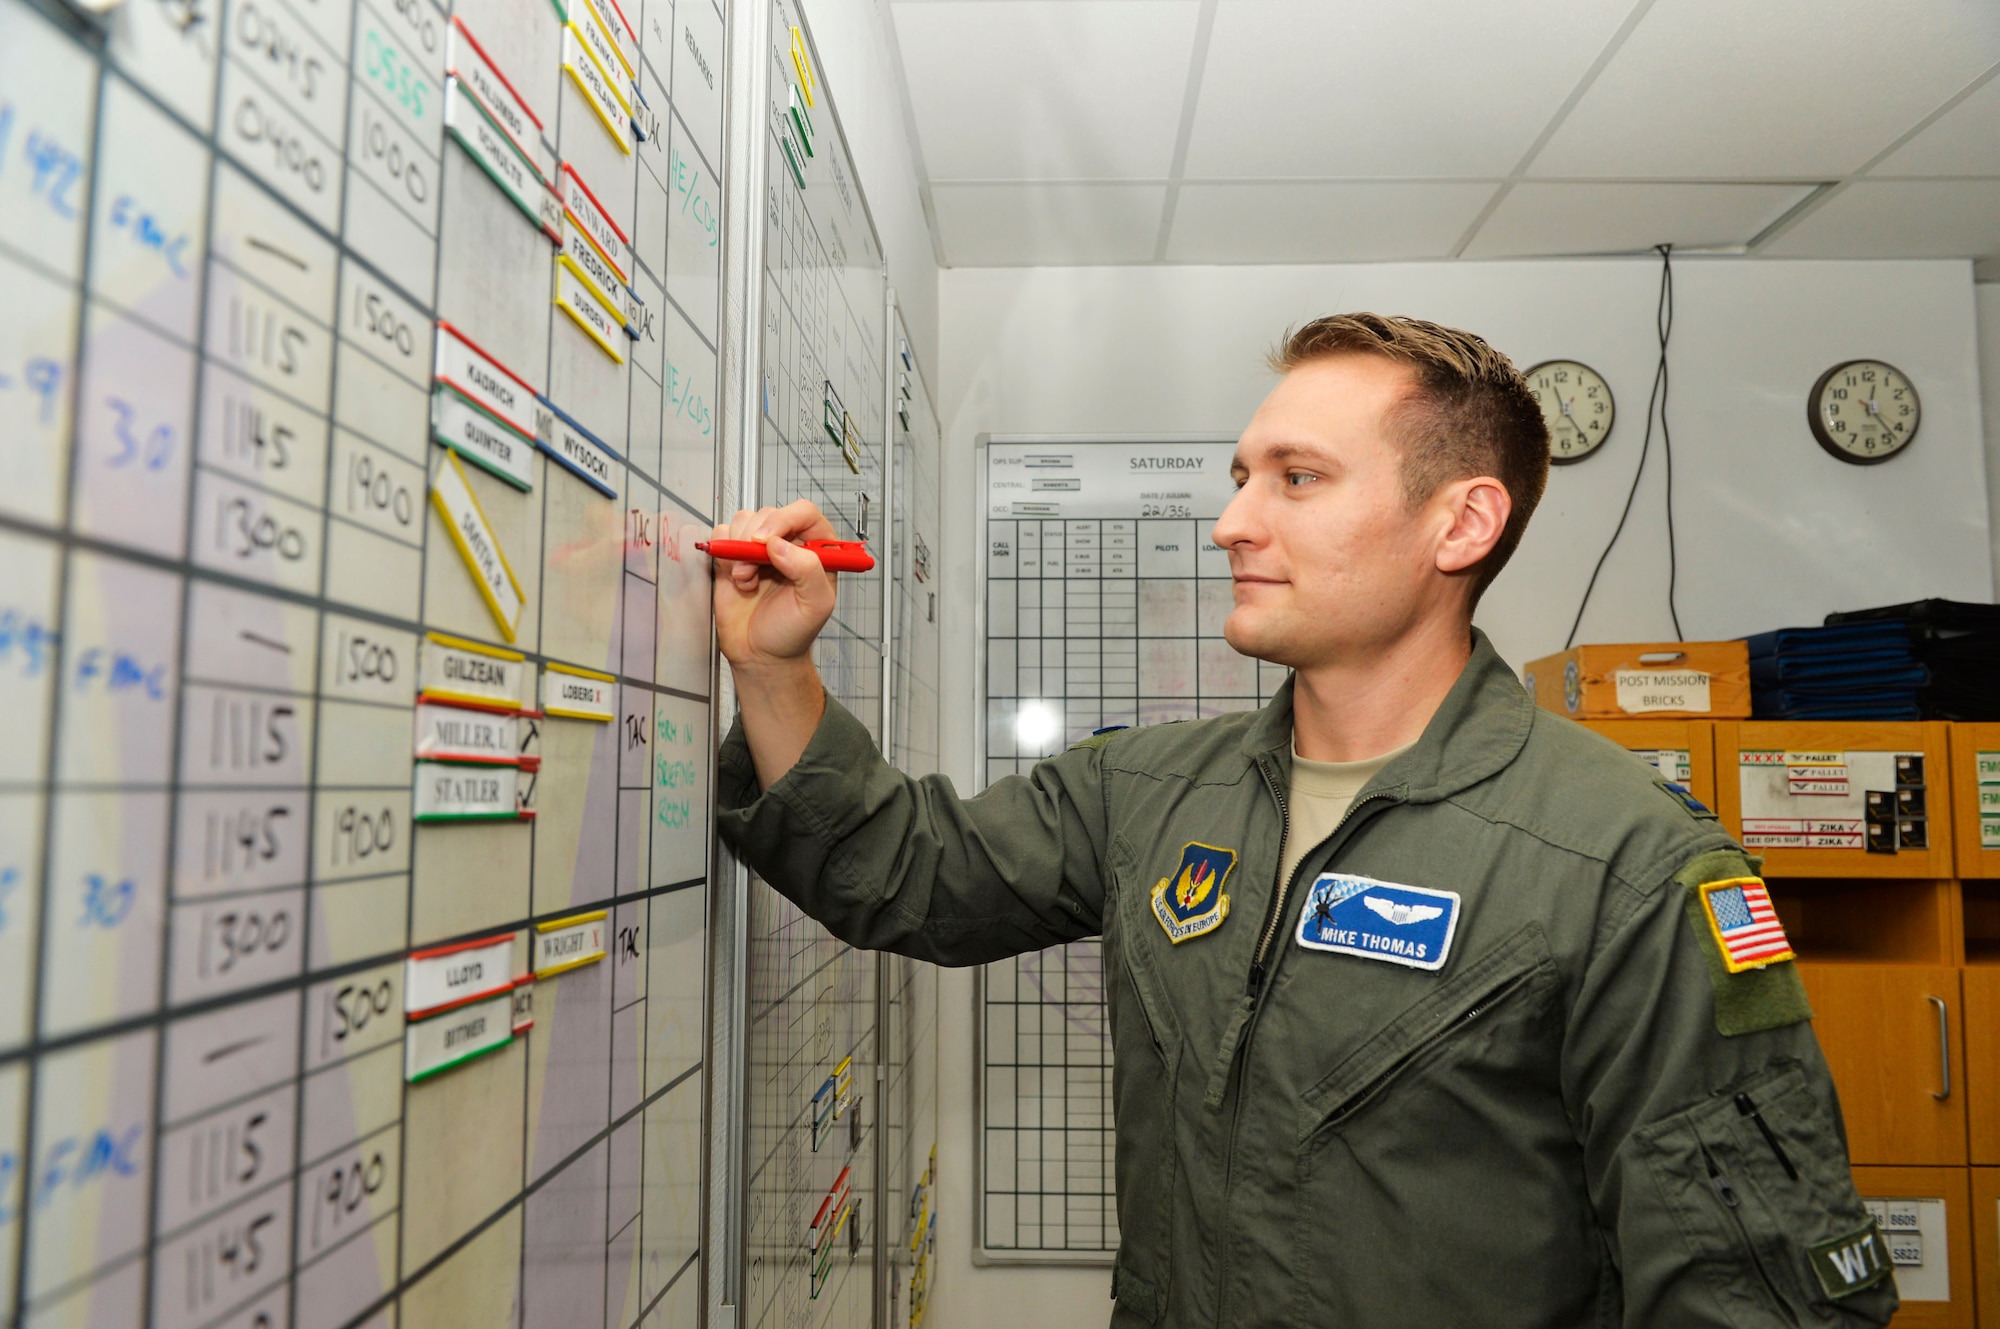 U.S. Air Force Capt. Mike Thomas, 37th Airlift Squadron central scheduler, reviews his unit’s flight schedule on Ramstein Air Base, Germany, Dec. 19, 2018. The 37th AS always has a team on standby to respond to missions any time of the year. (U.S. Air Force photo by Senior Airman Joshua Magbanua)